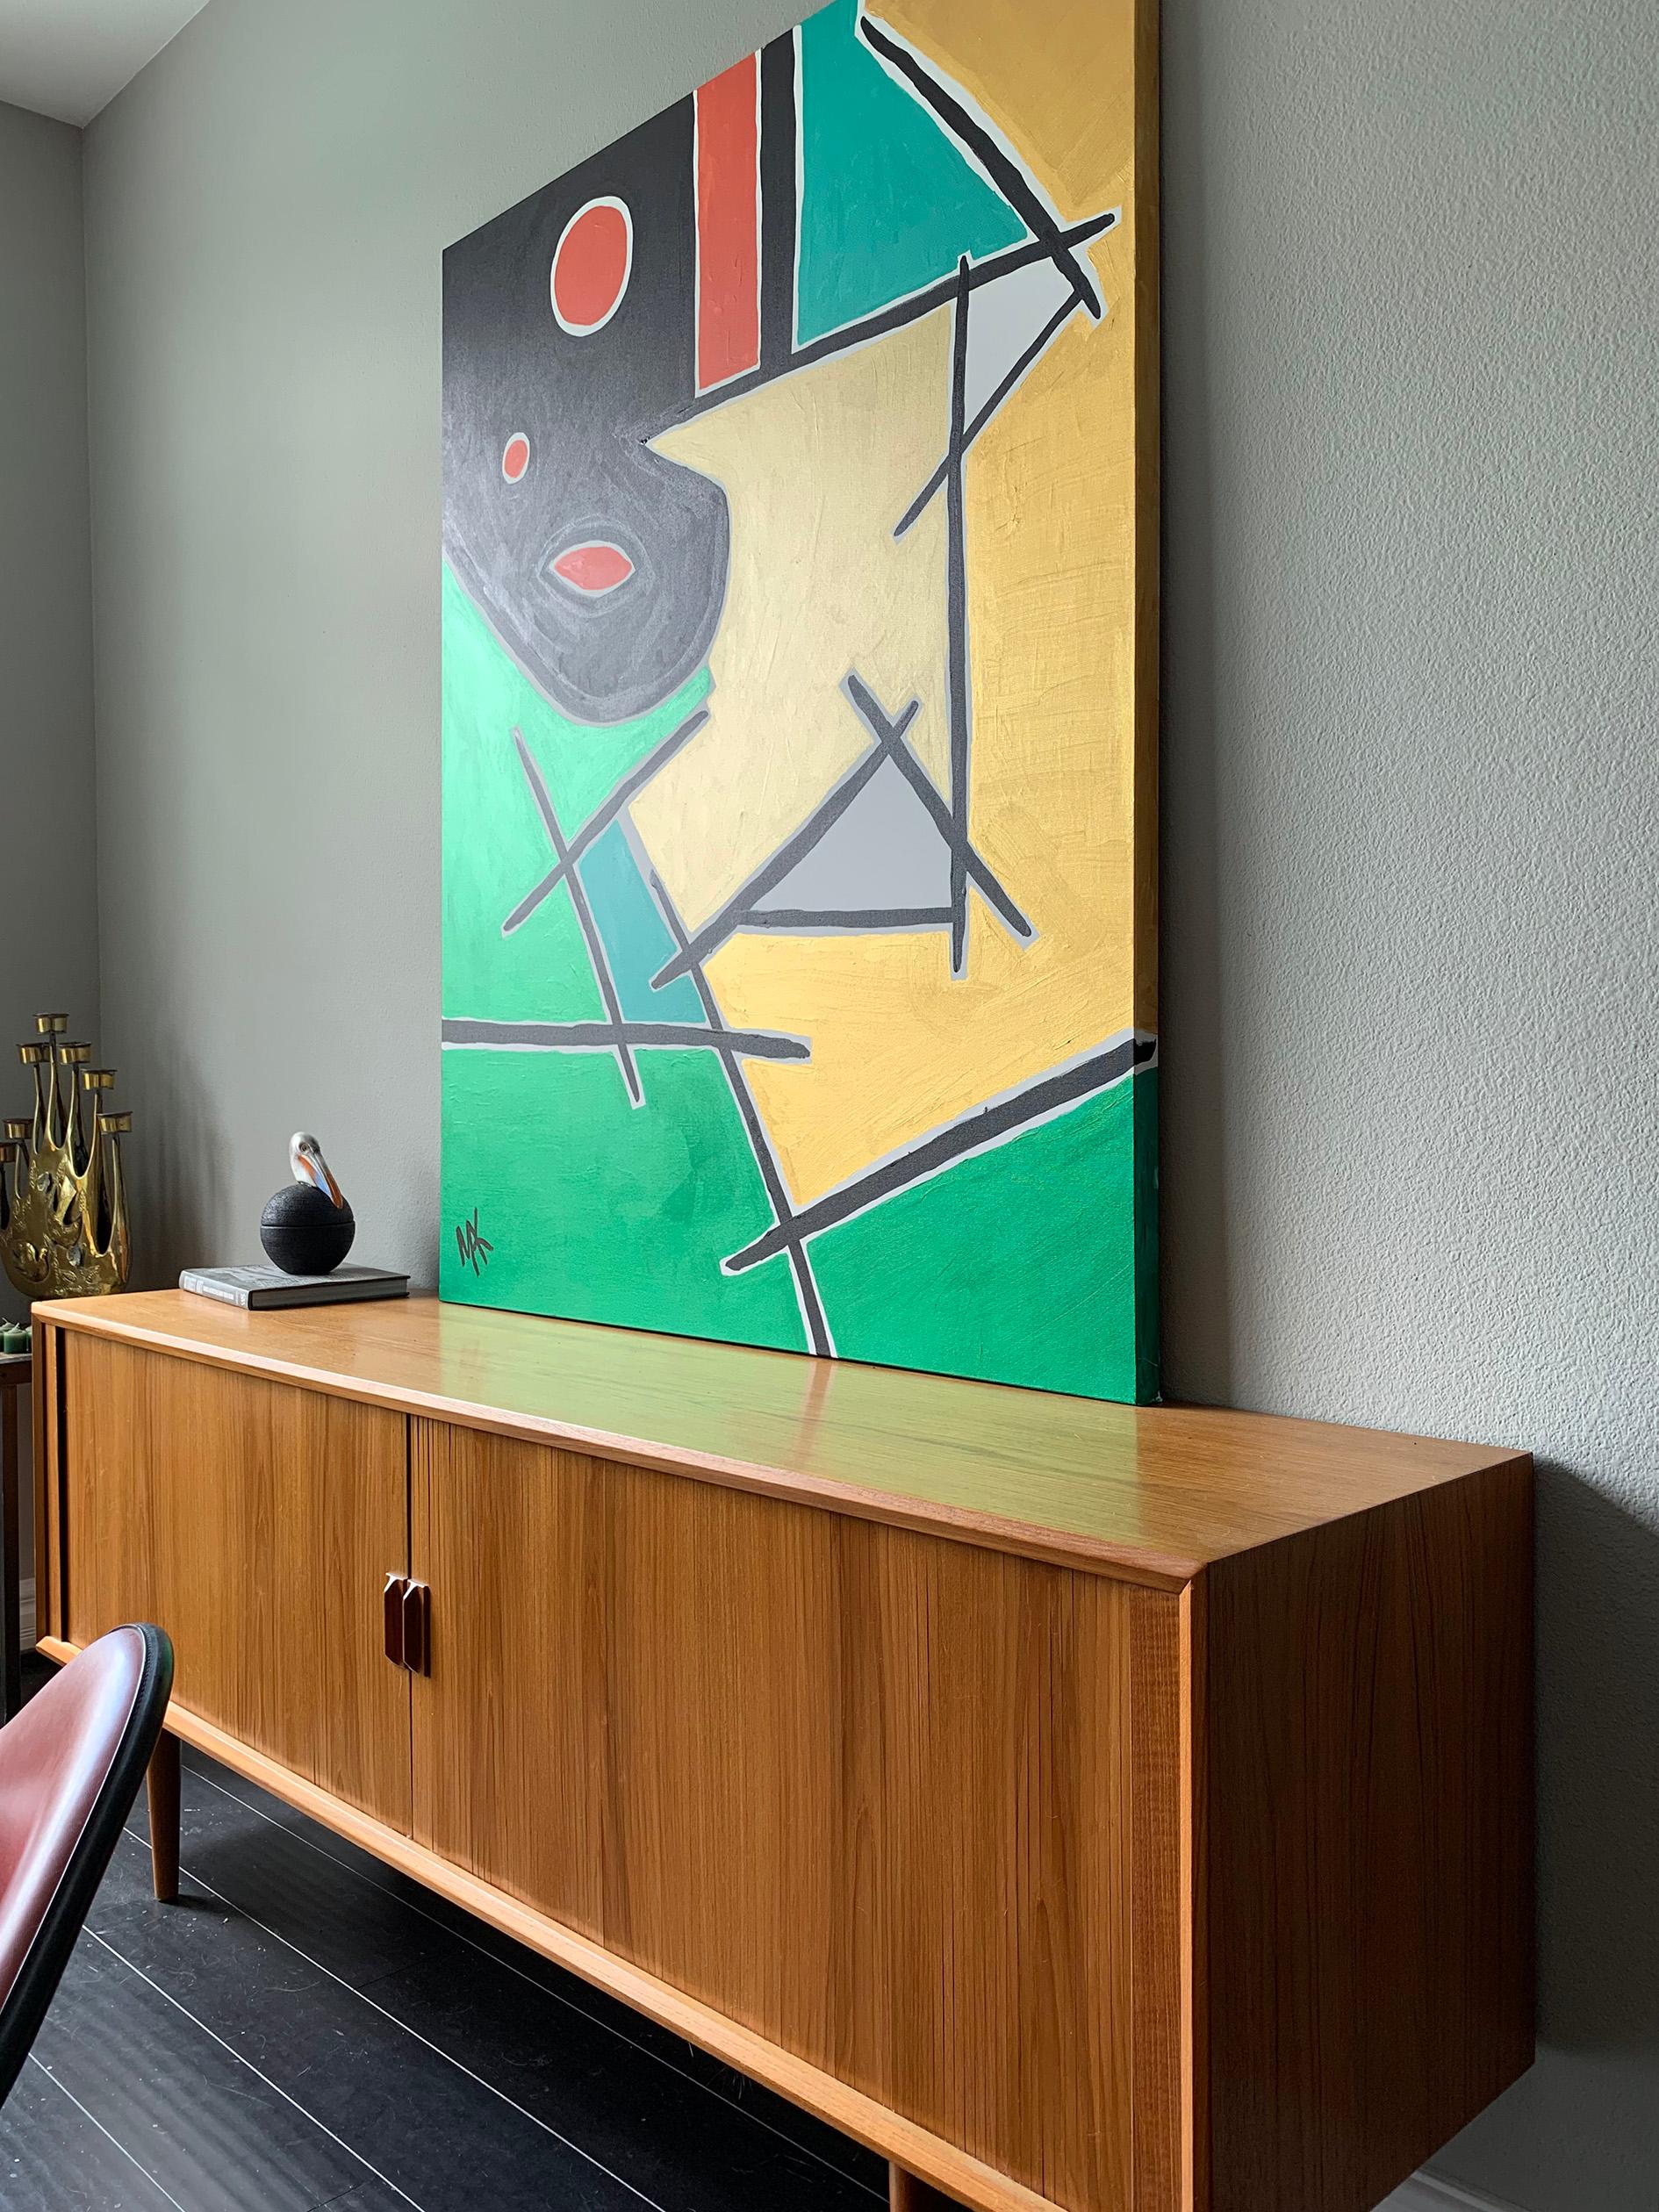 A stunning modern painting by Mak, 2019. The painting features golden hues with green metallic, coral and black. 

Would look great in any modern, Mid-Century Modern, or contemporary environment.